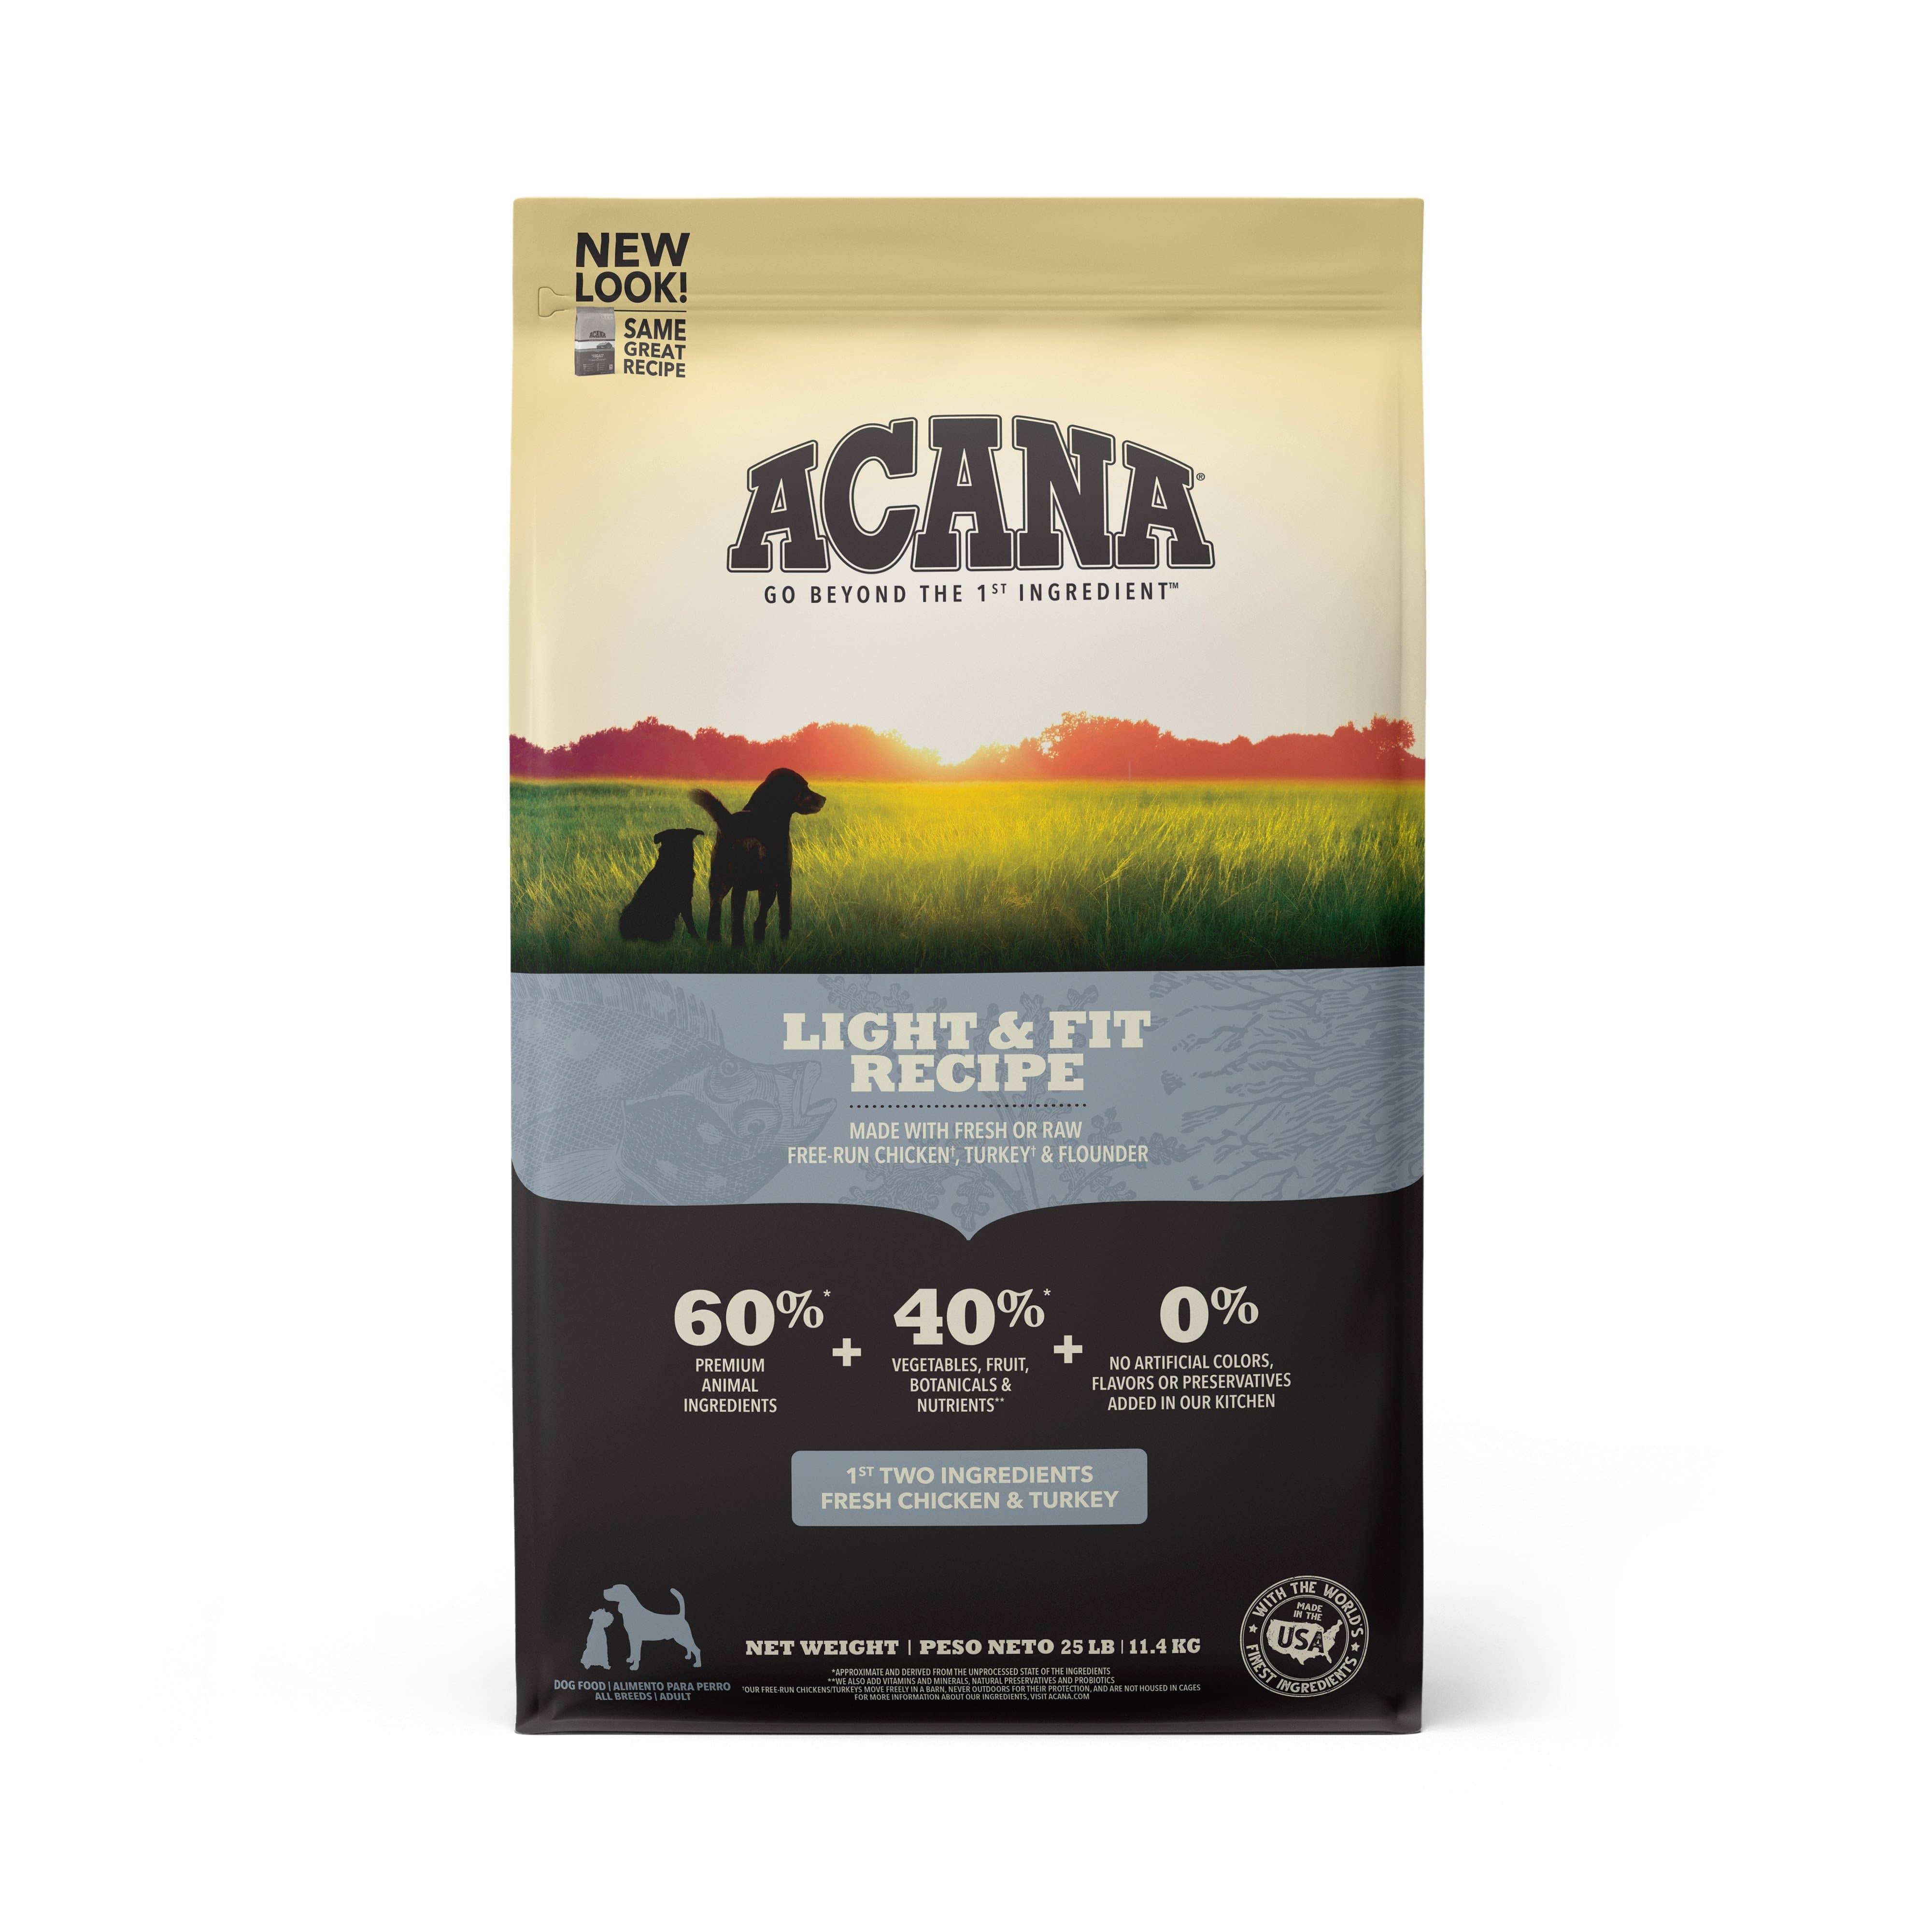 Acana Grain Free Adult Dog Food, Light & Fit To Support Healthy Weight, 25lb